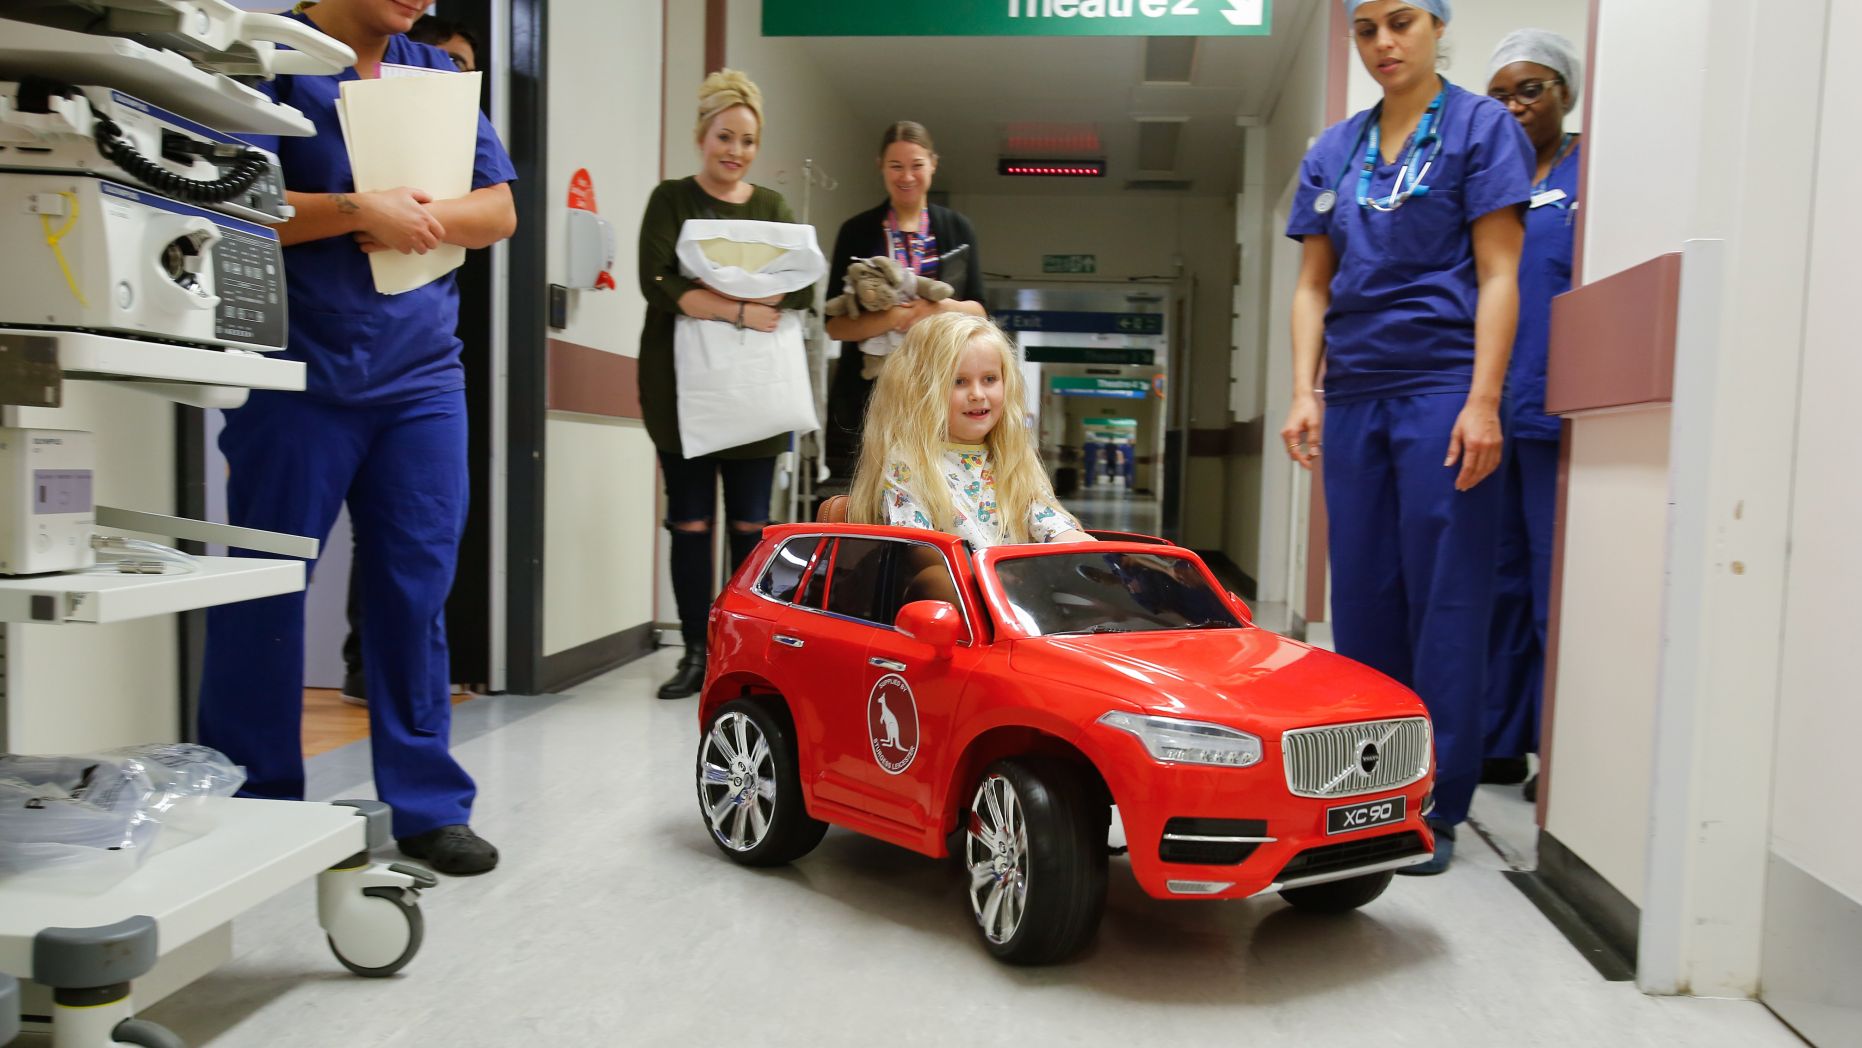 Hospital lets kids ‘drive’ to surgery with motorized car